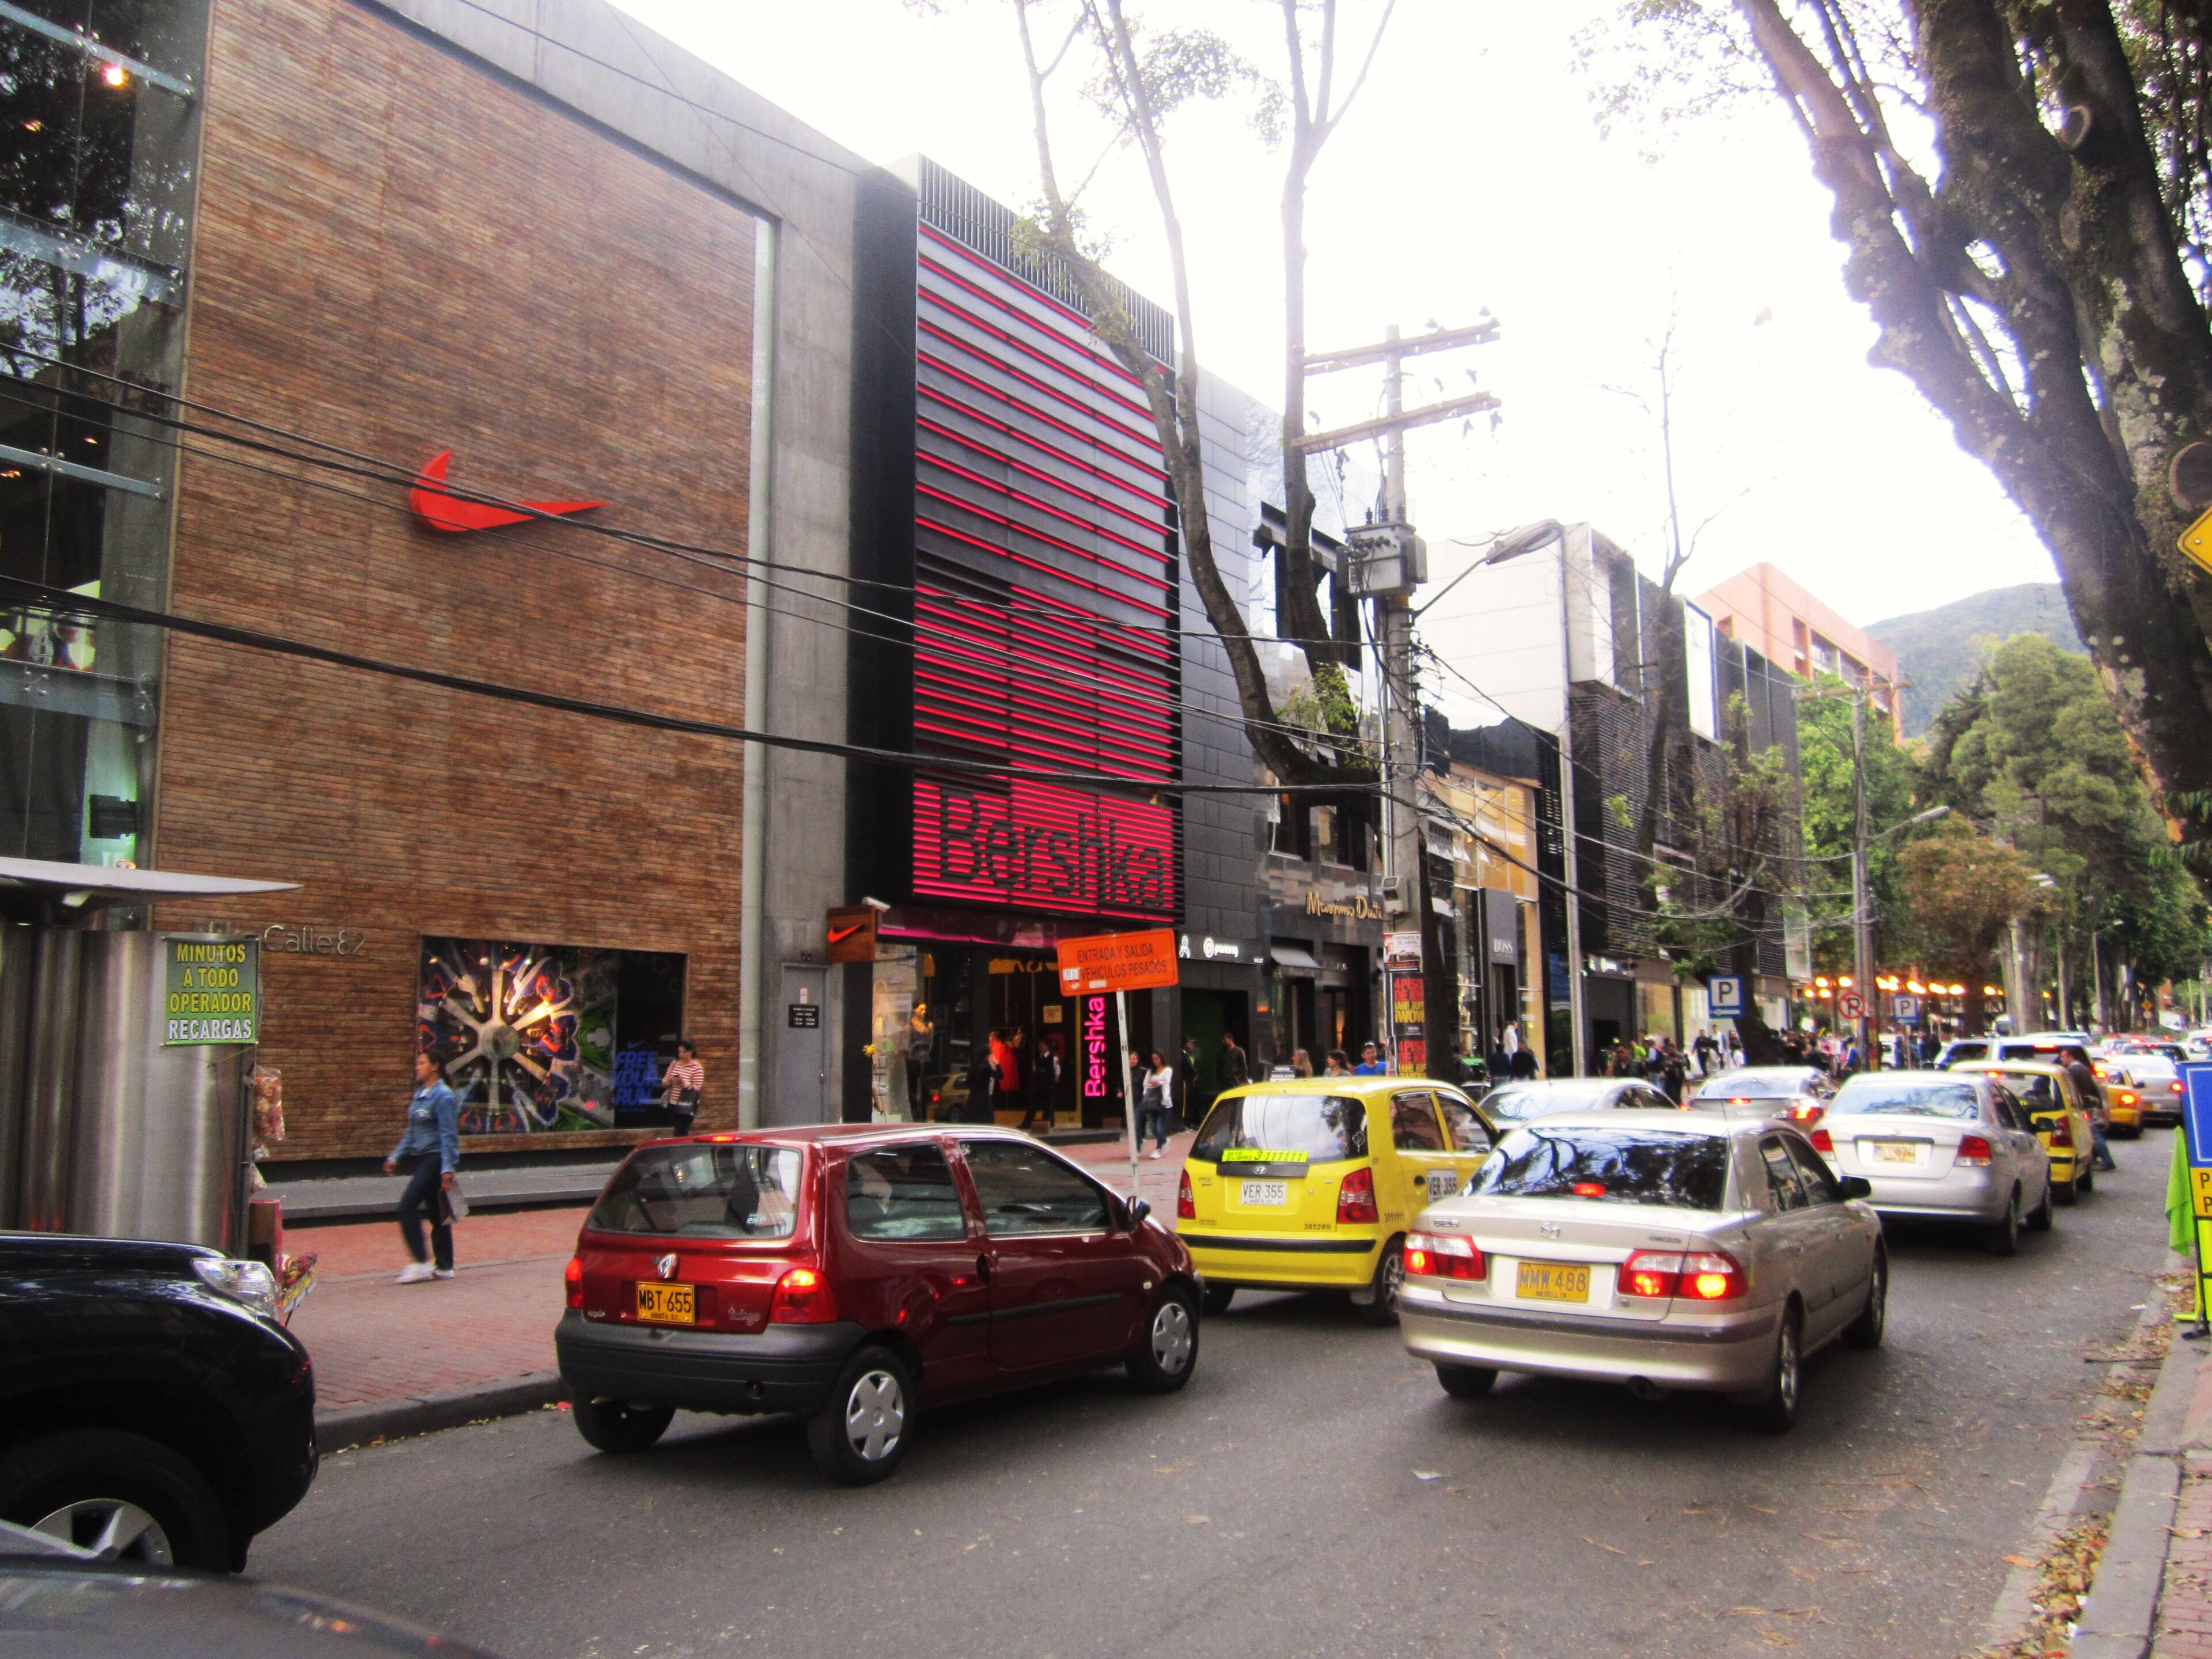 A bustling city street lined with retail stores, including a prominent sportswear outlet and a fashion retailer. Cars and taxis navigate the traffic, with pedestrians walking along the sidewalk under the shade of street trees.